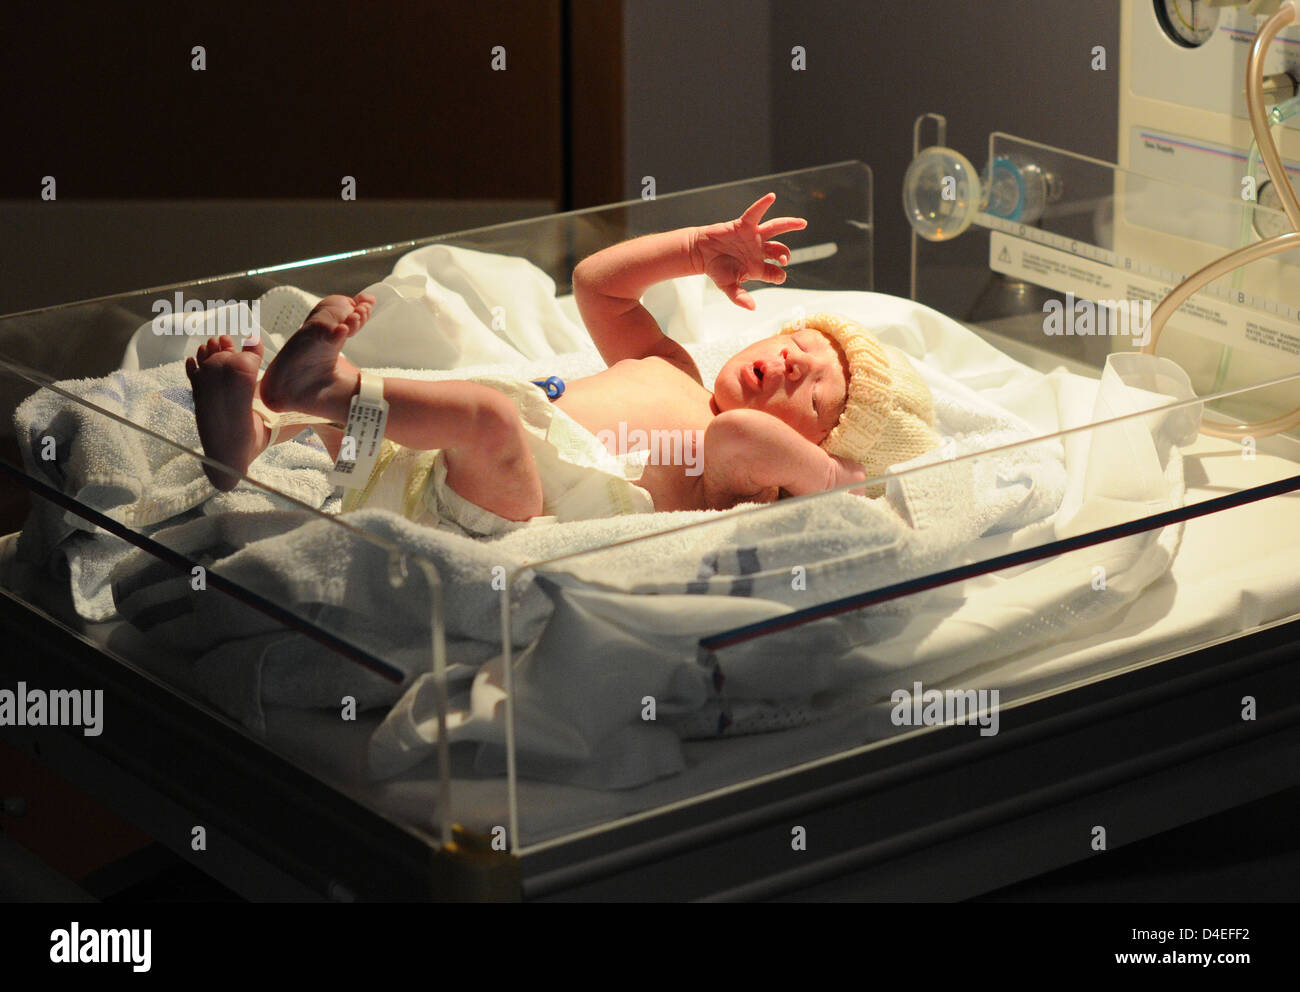 A new born baby a few minutes after delivery on 26th November 2011. Stock Photo